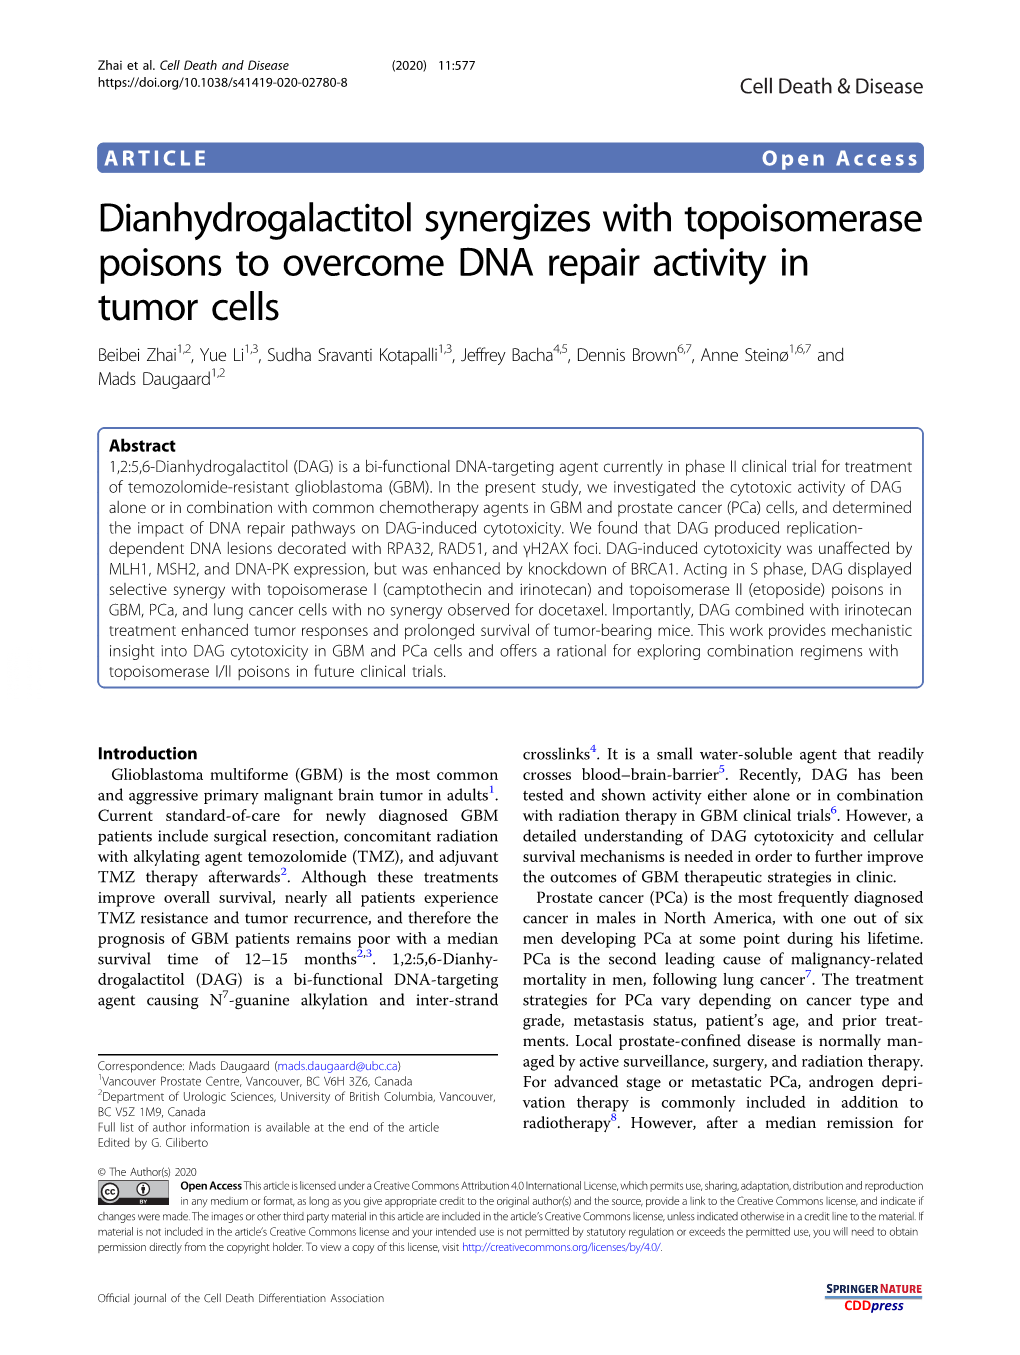 Dianhydrogalactitol Synergizes with Topoisomerase Poisons to Overcome DNA Repair Activity in Tumor Cells